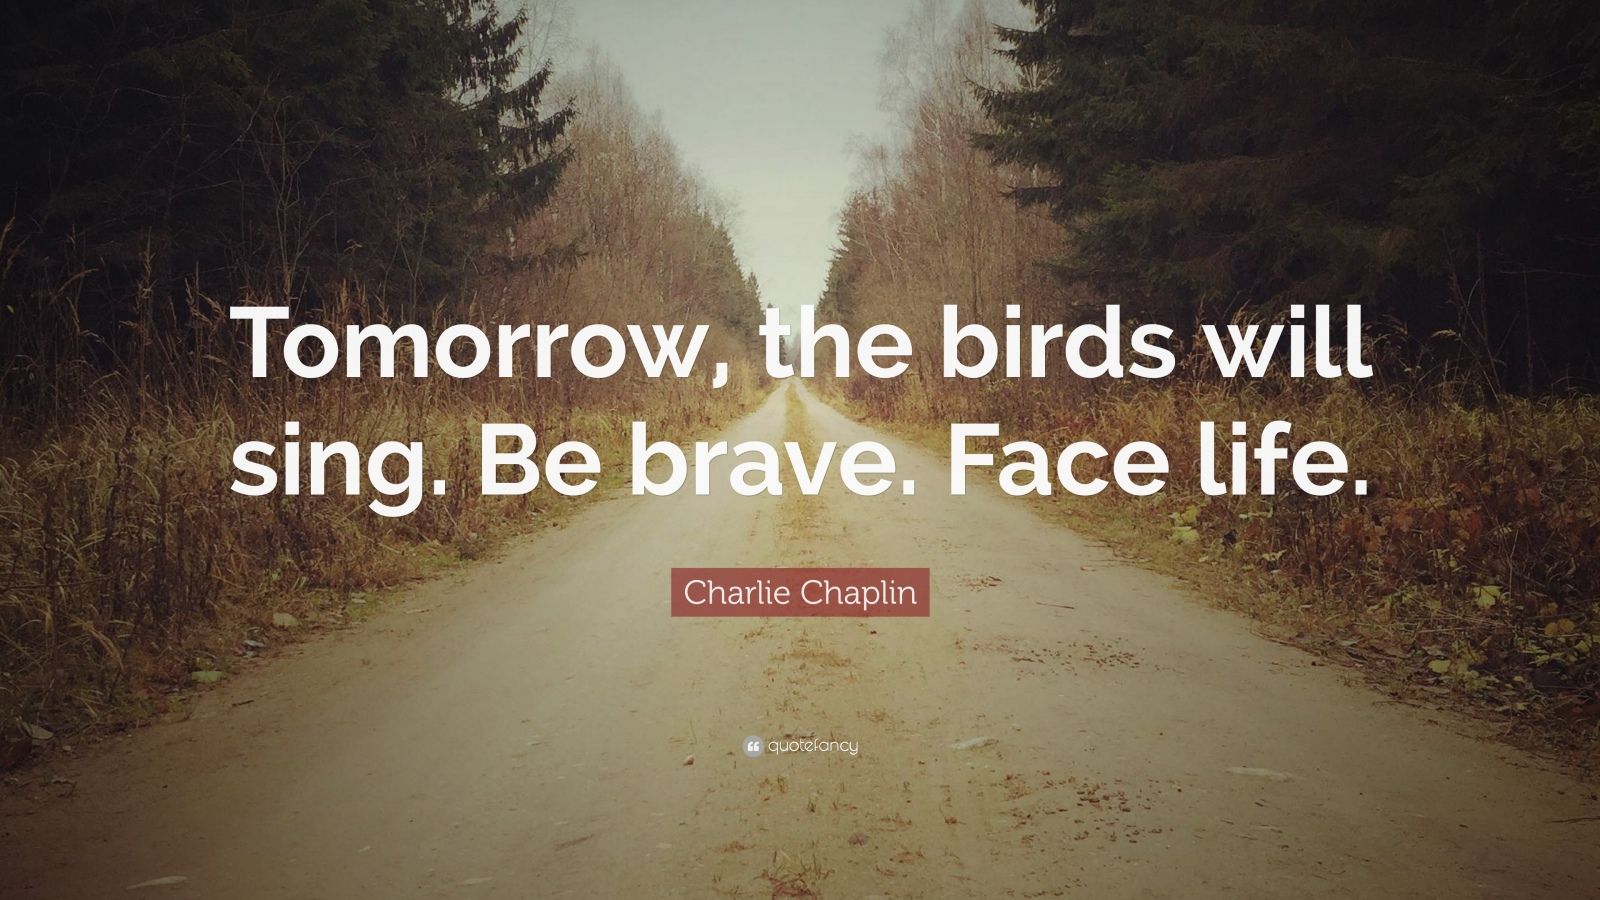 Charlie Chaplin Quote: “Tomorrow, the birds will sing. Be brave. Face ...